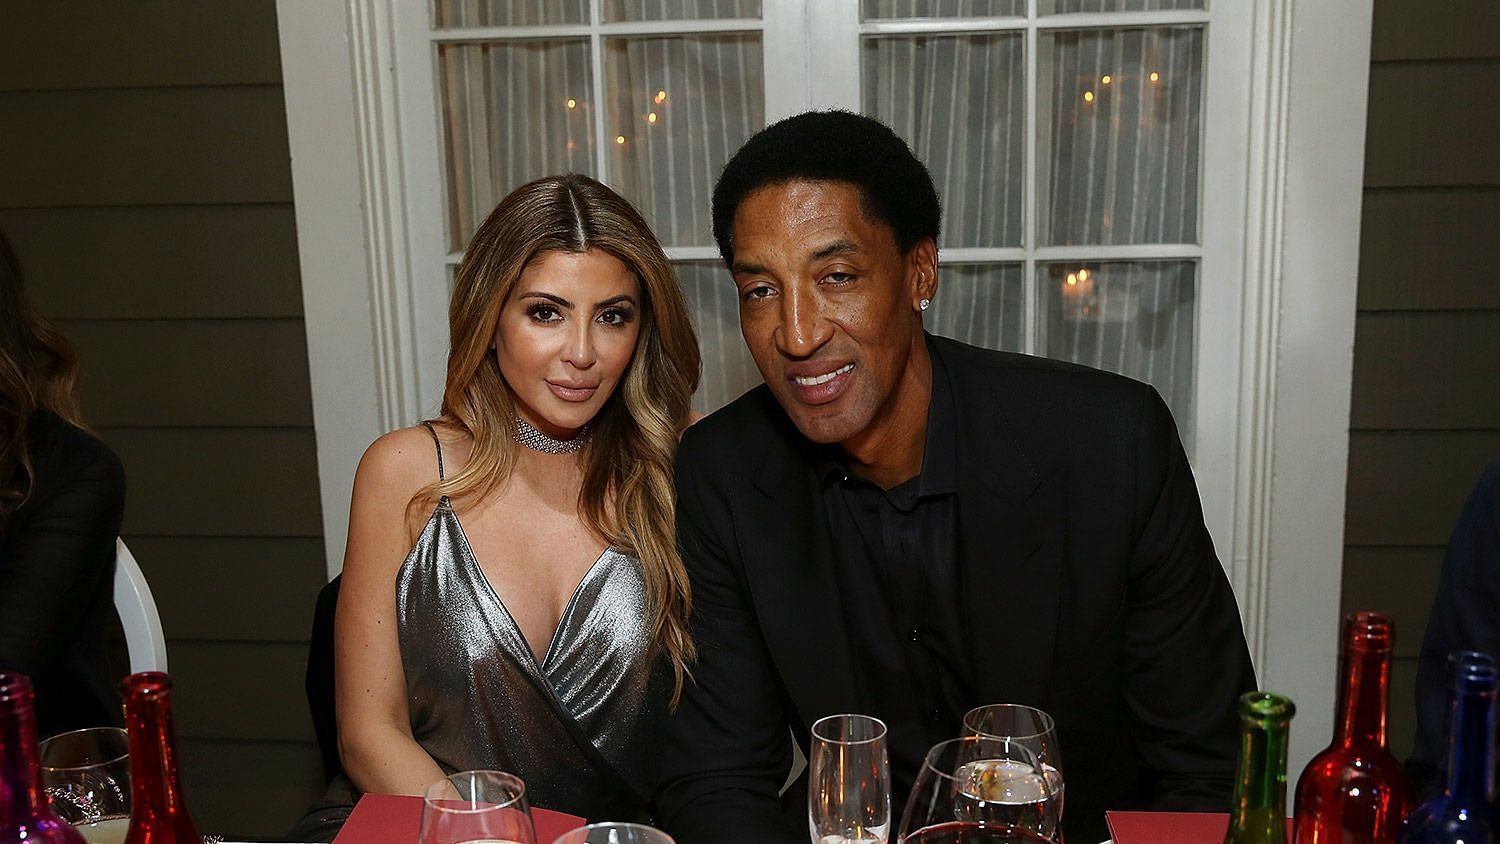 Who is Larsa Pippen? Taking a closer look at the relationship between